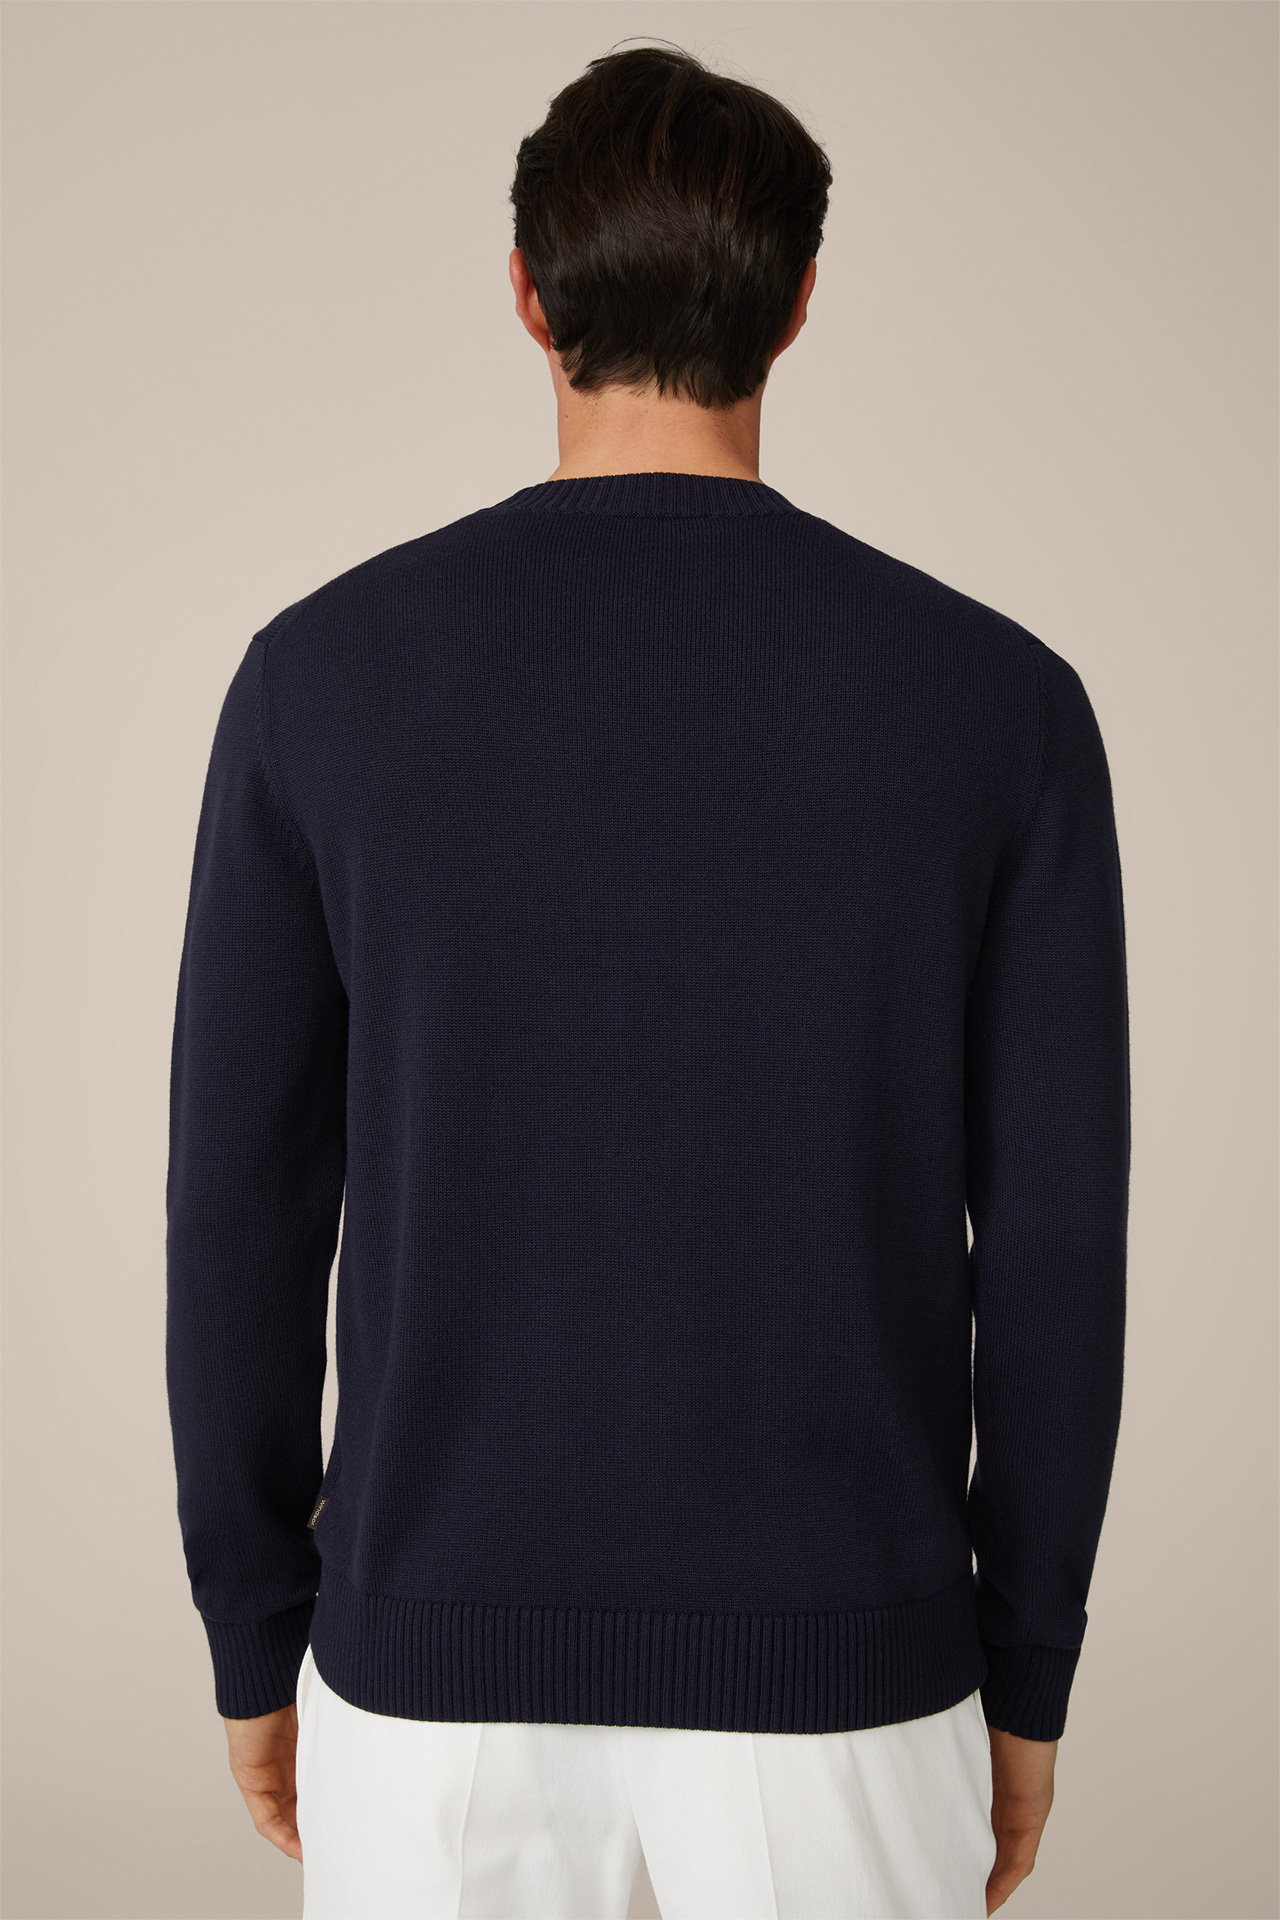 Nedo Knitted Sweater in Navy